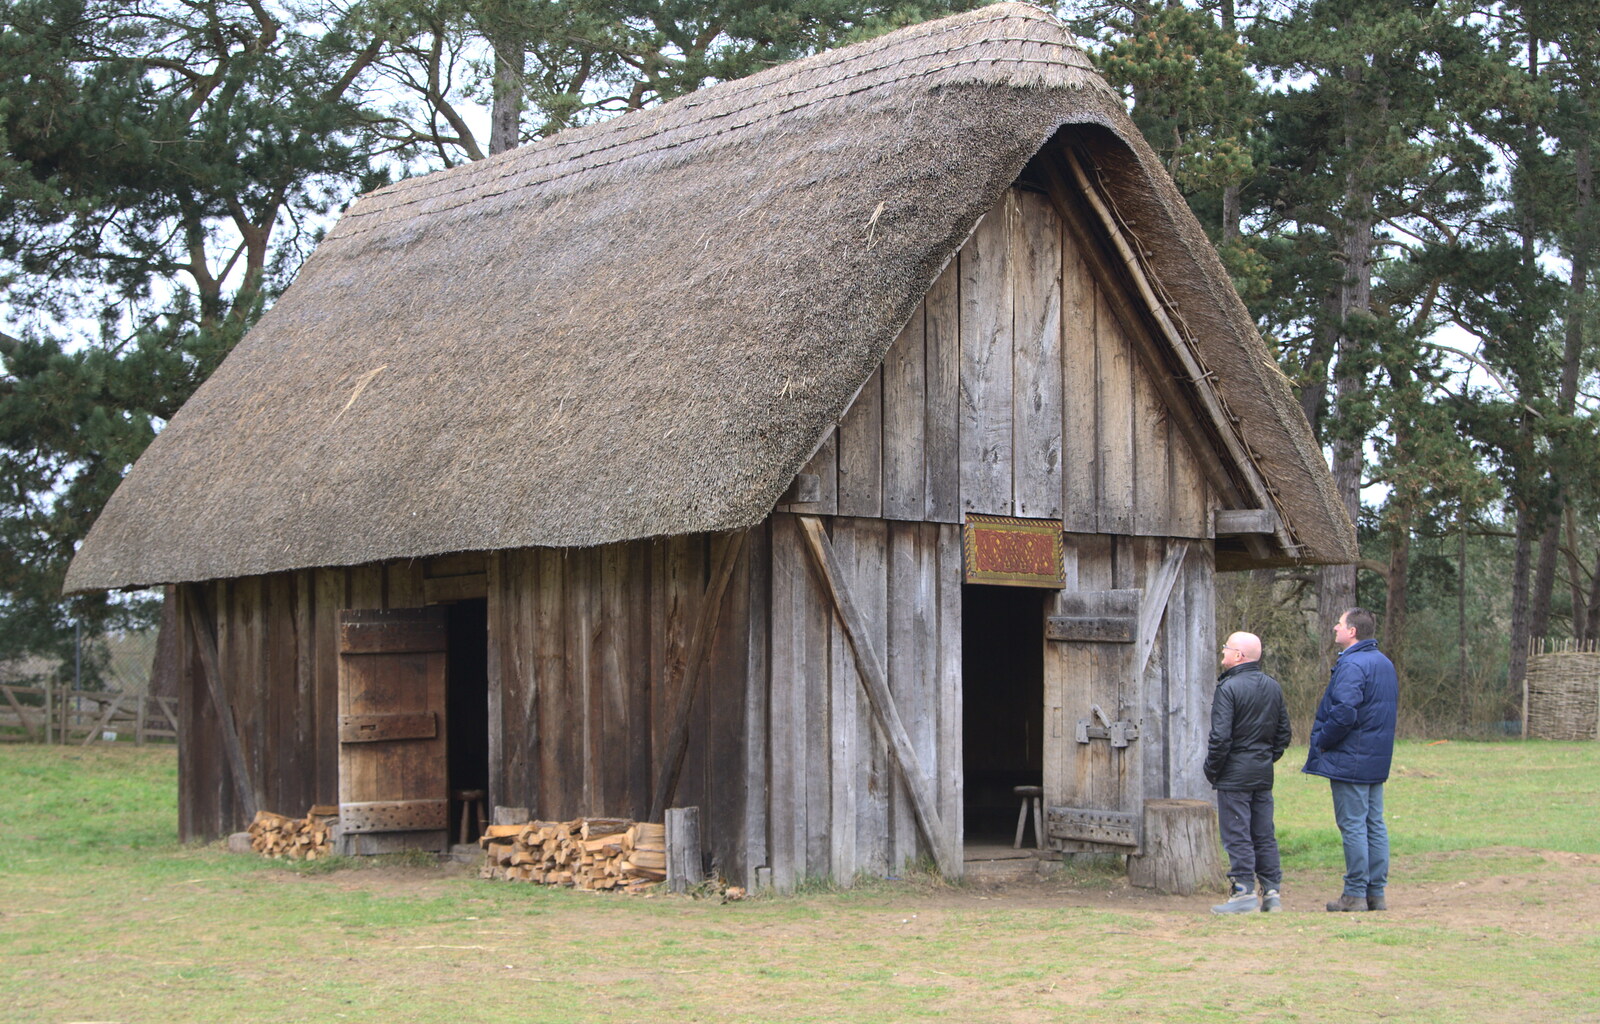 A reconstructed hall from An Anglo-Saxon Village, West Stow, Suffolk - 19th February 2017